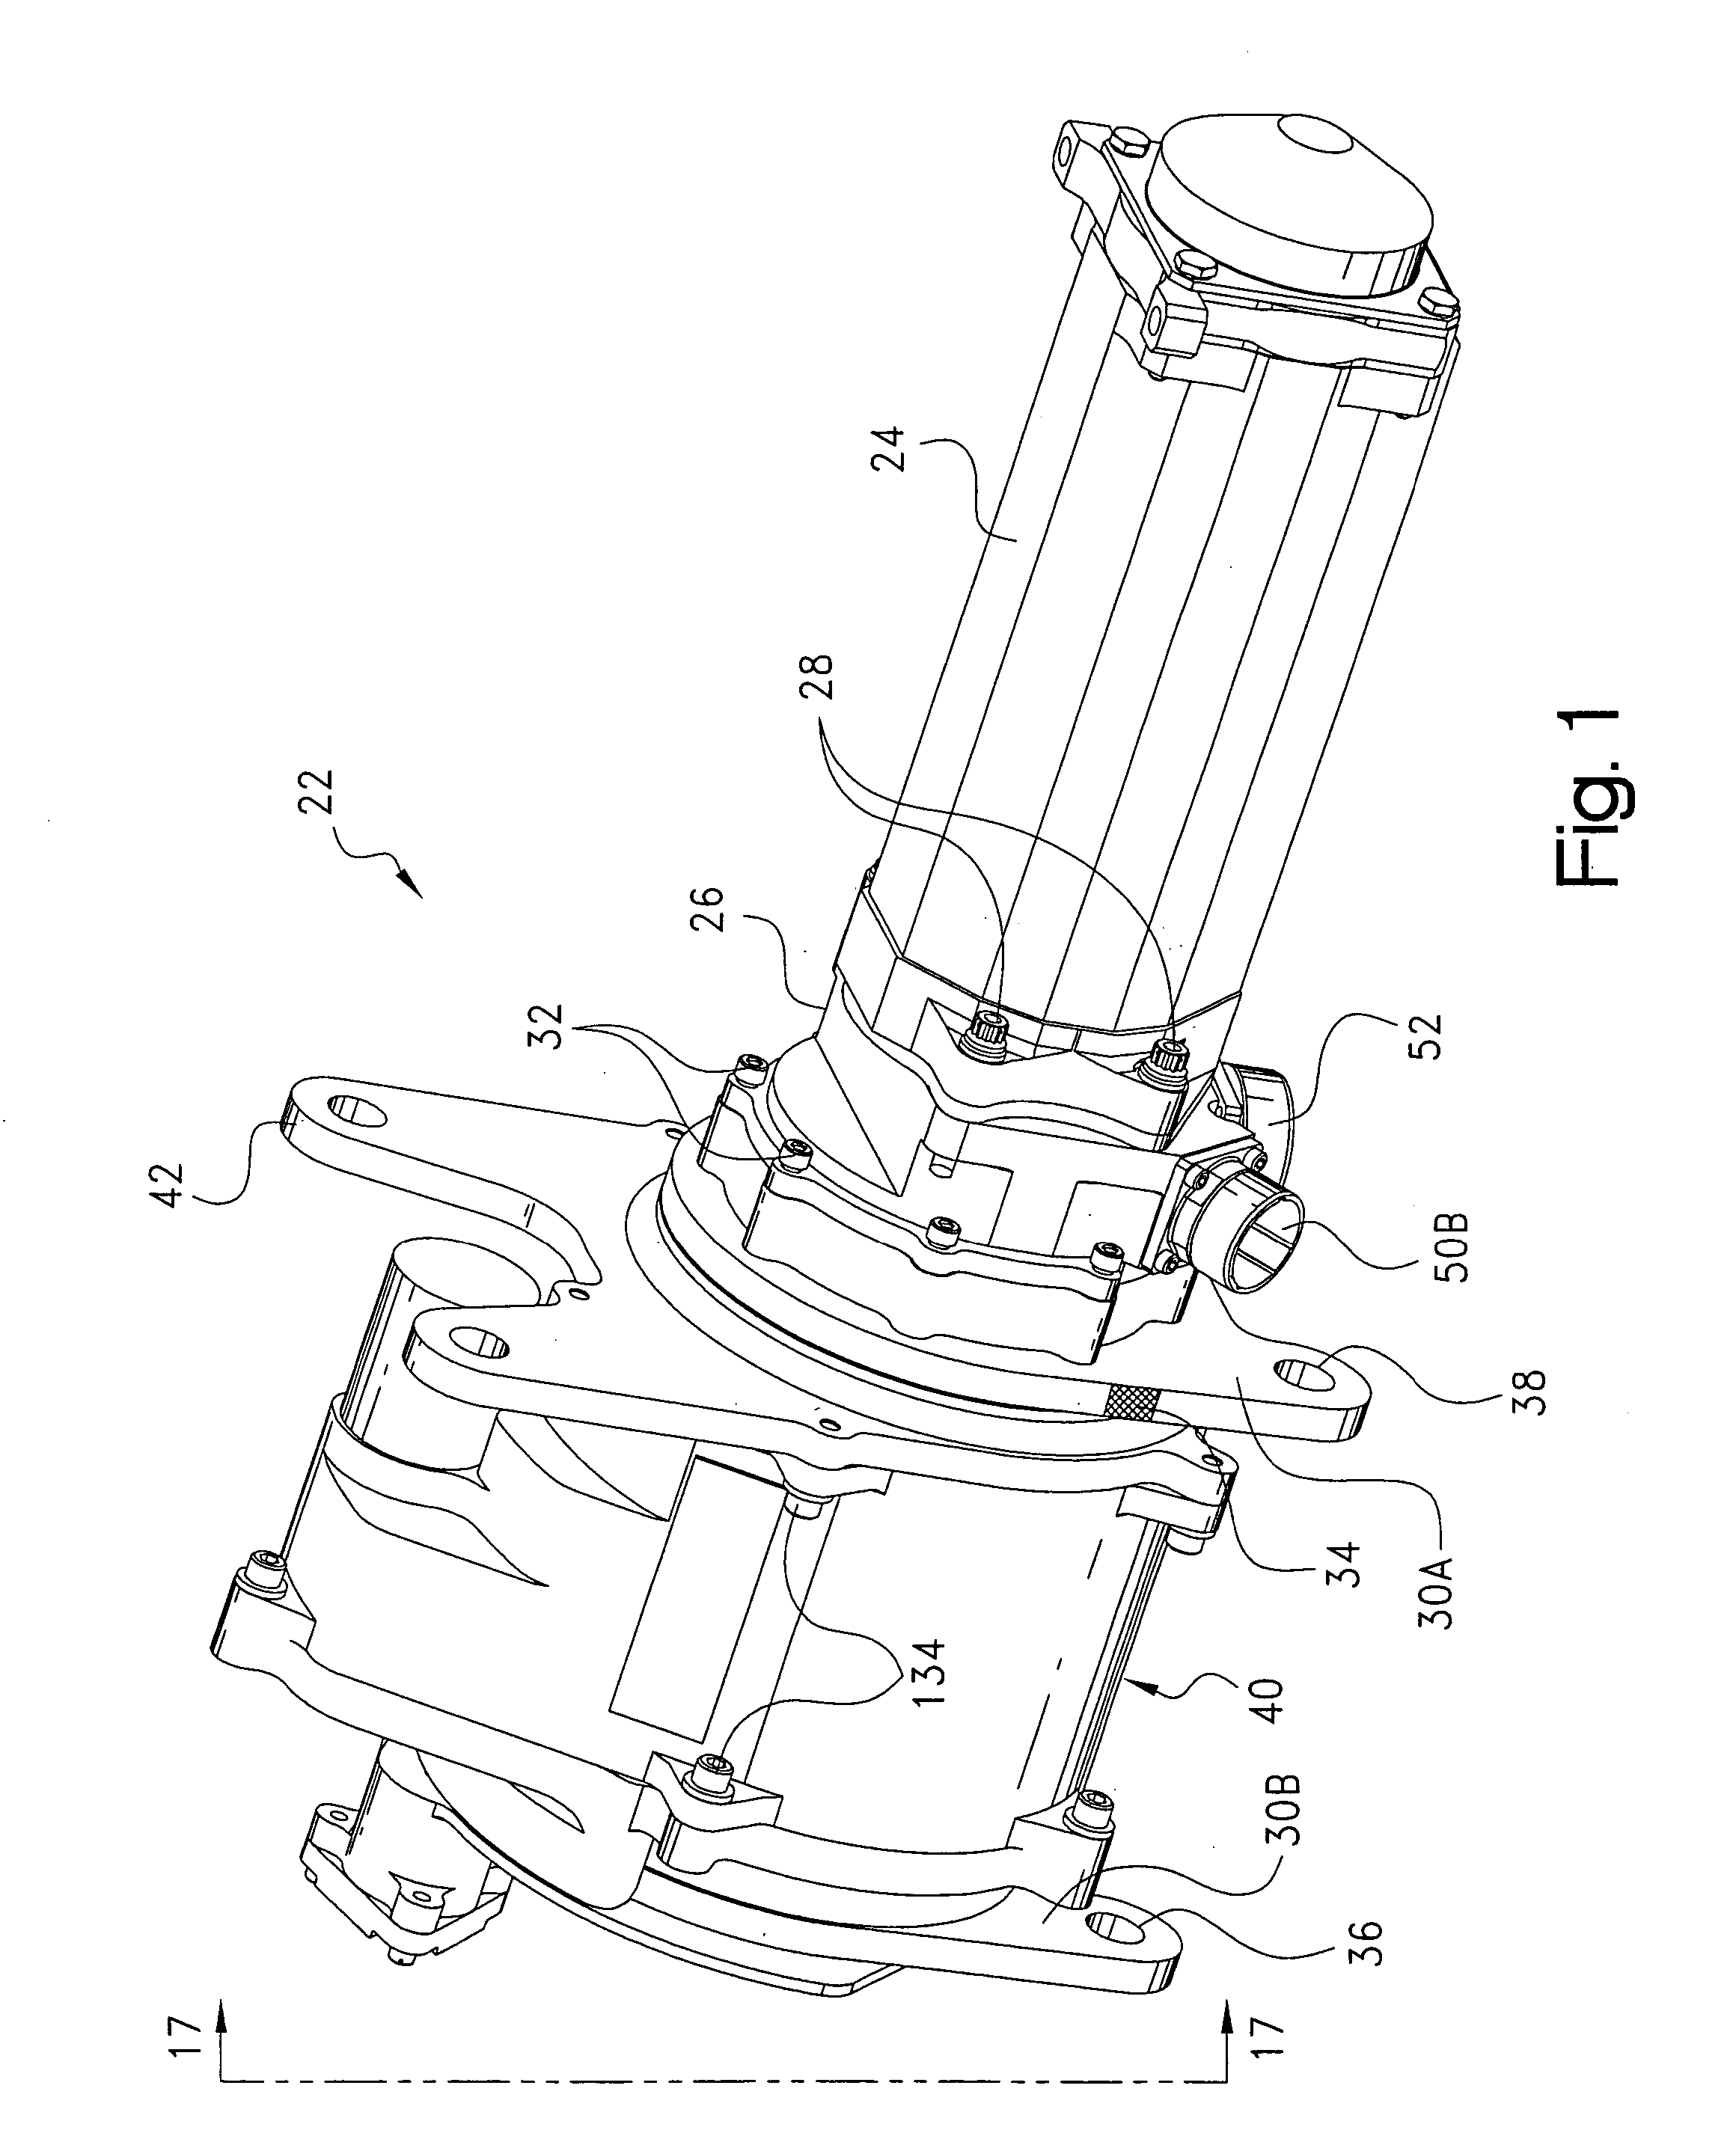 Jam tolerant electromechanical actuation systems and methods of operation